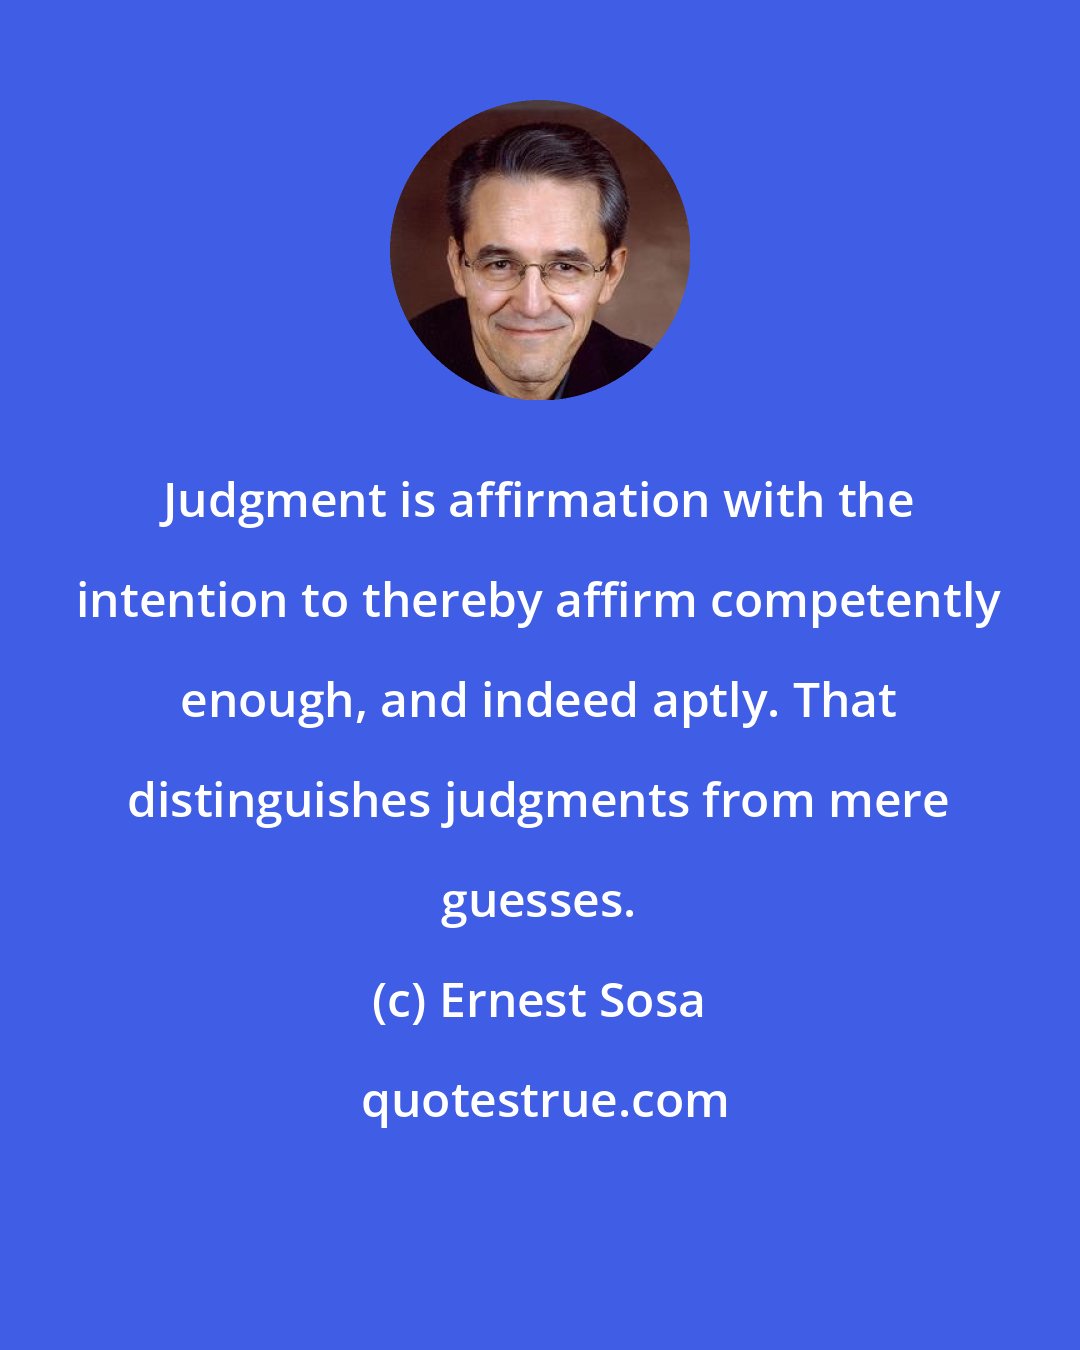 Ernest Sosa: Judgment is affirmation with the intention to thereby affirm competently enough, and indeed aptly. That distinguishes judgments from mere guesses.